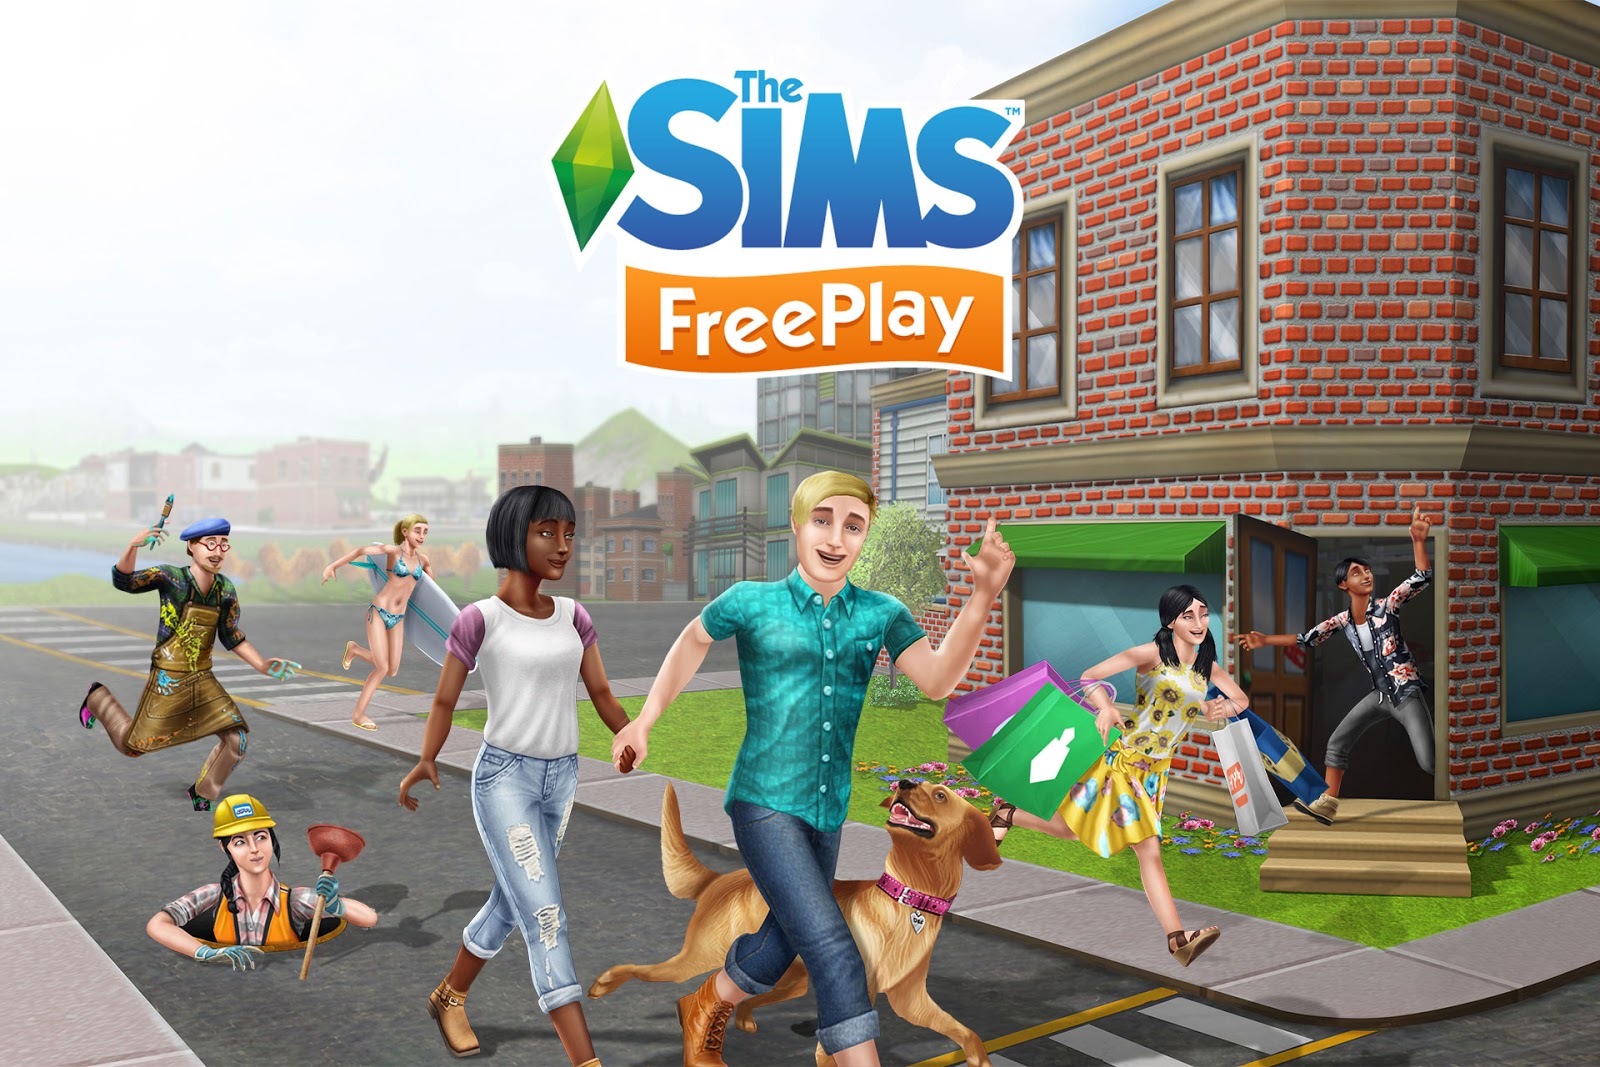 The Sims FreePlay
open world android games